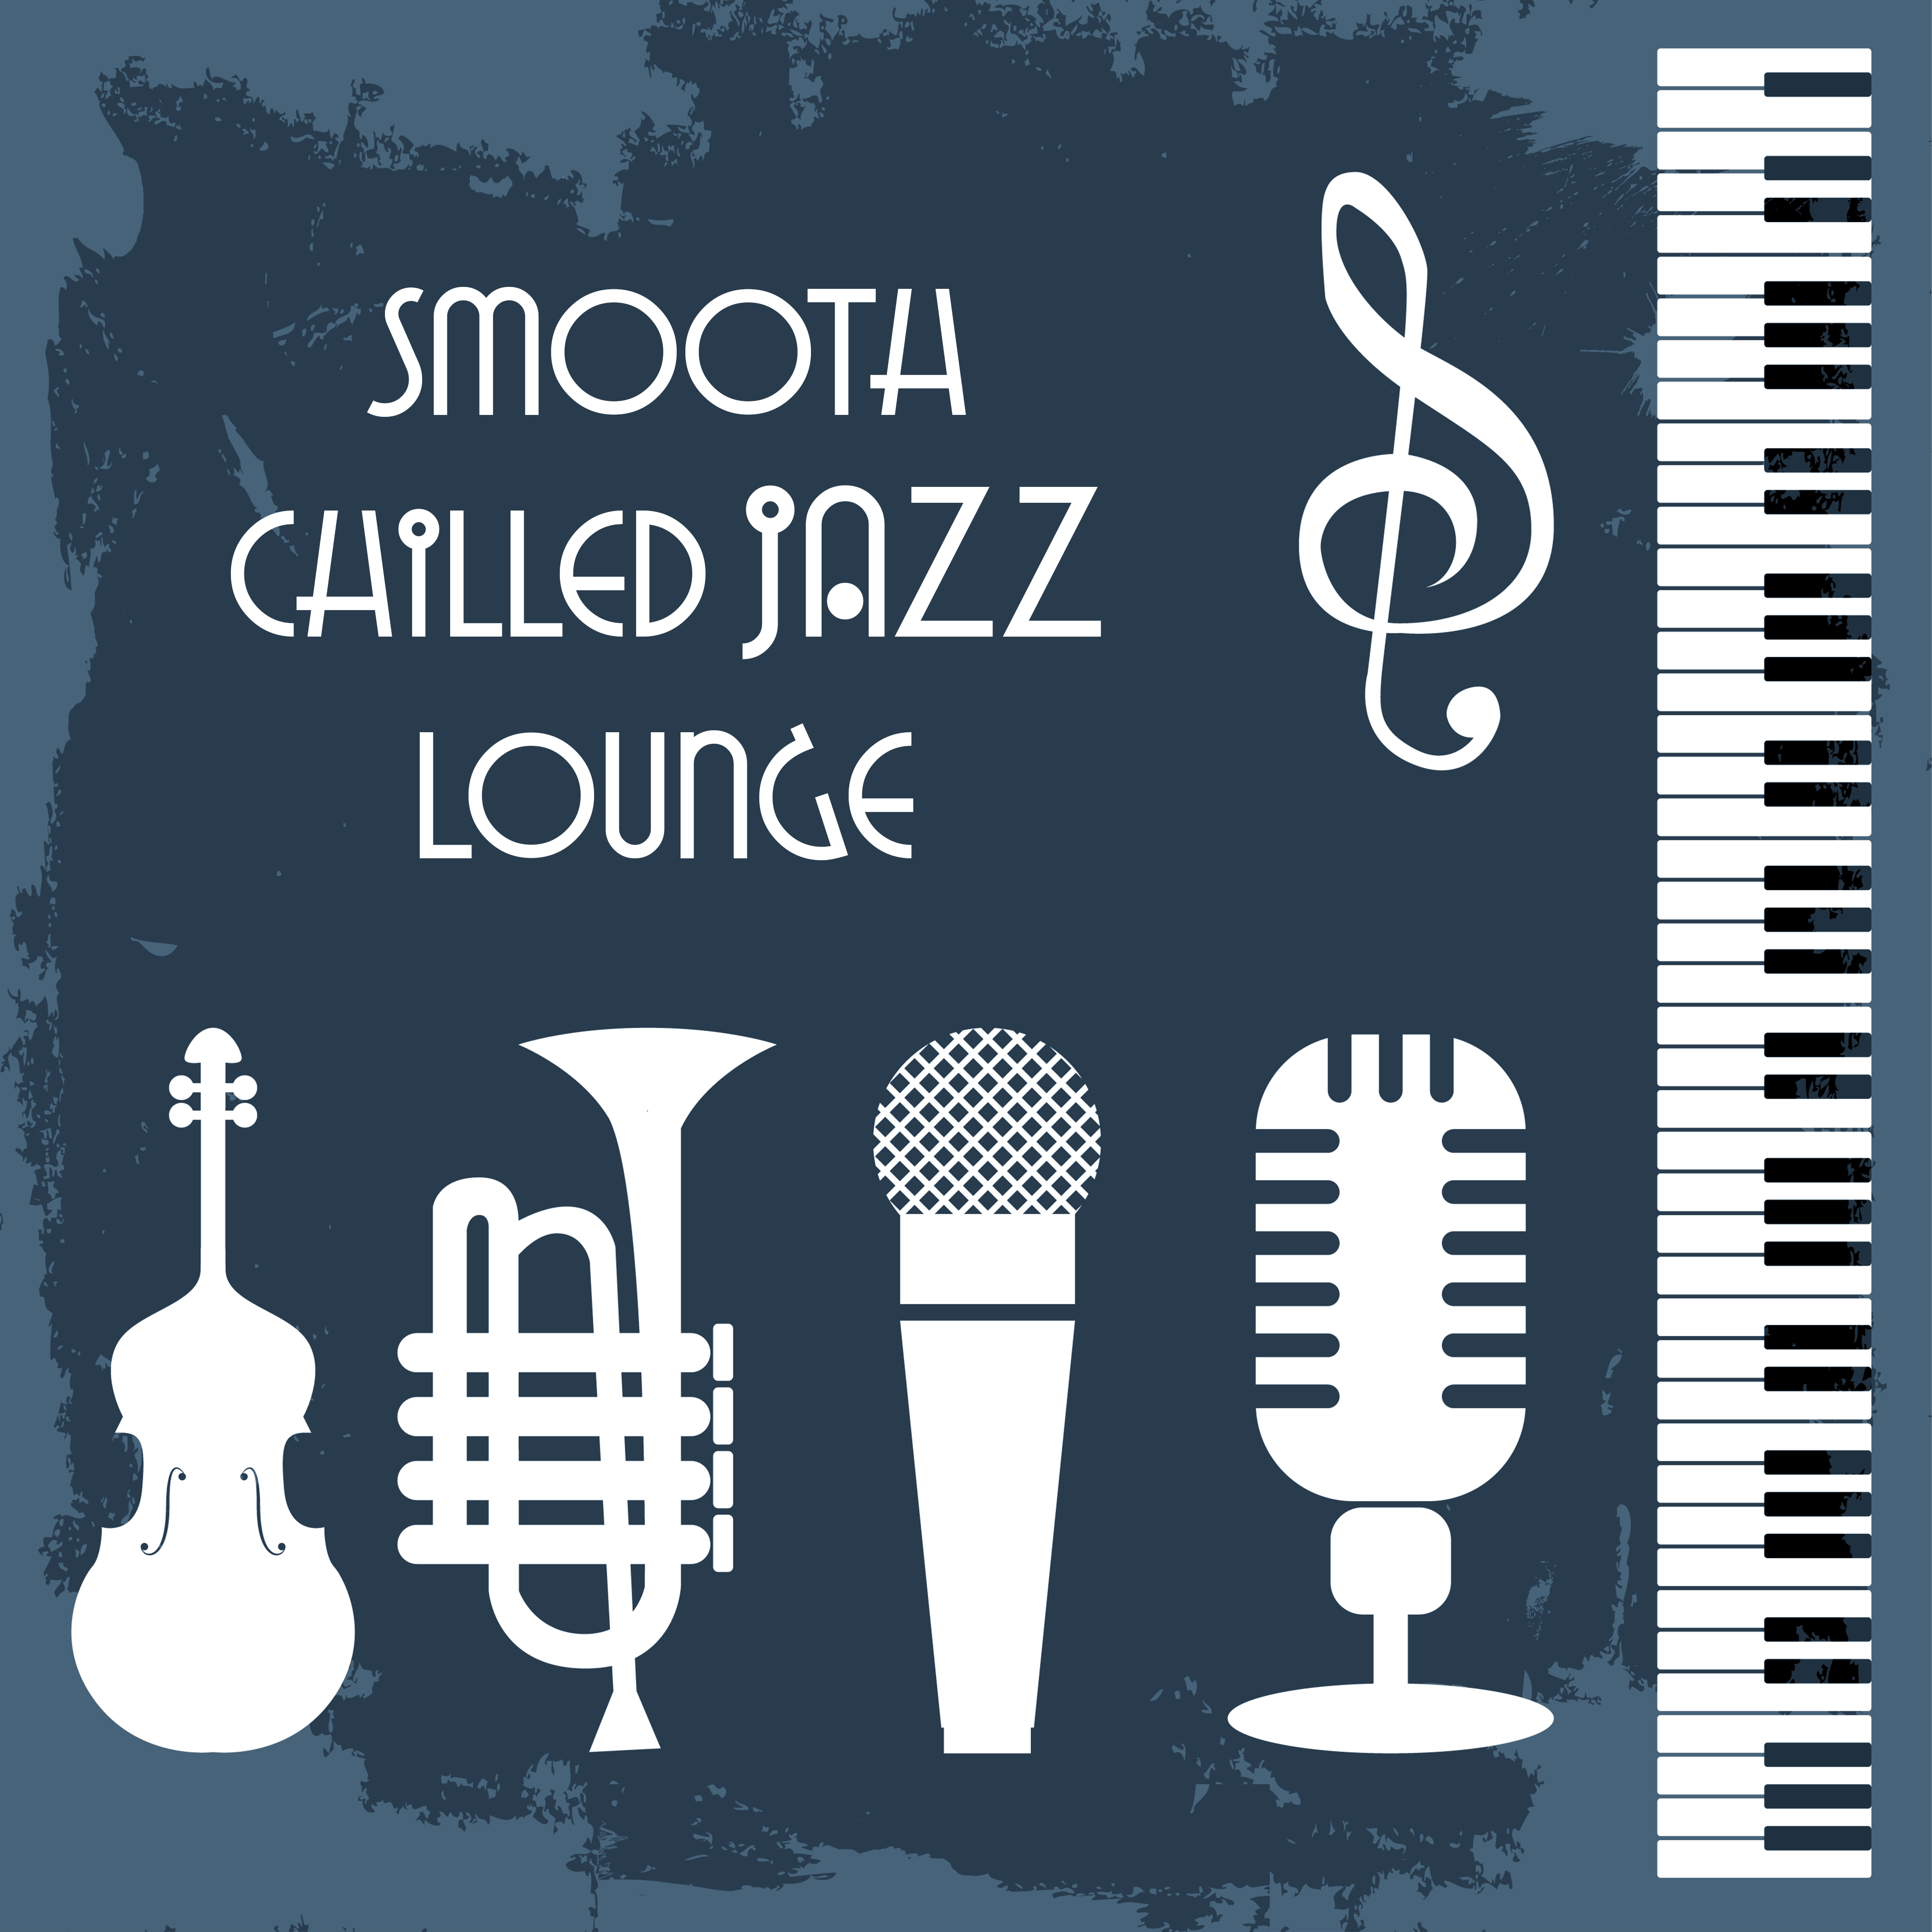 Smooth Chilled Jazz Lounge